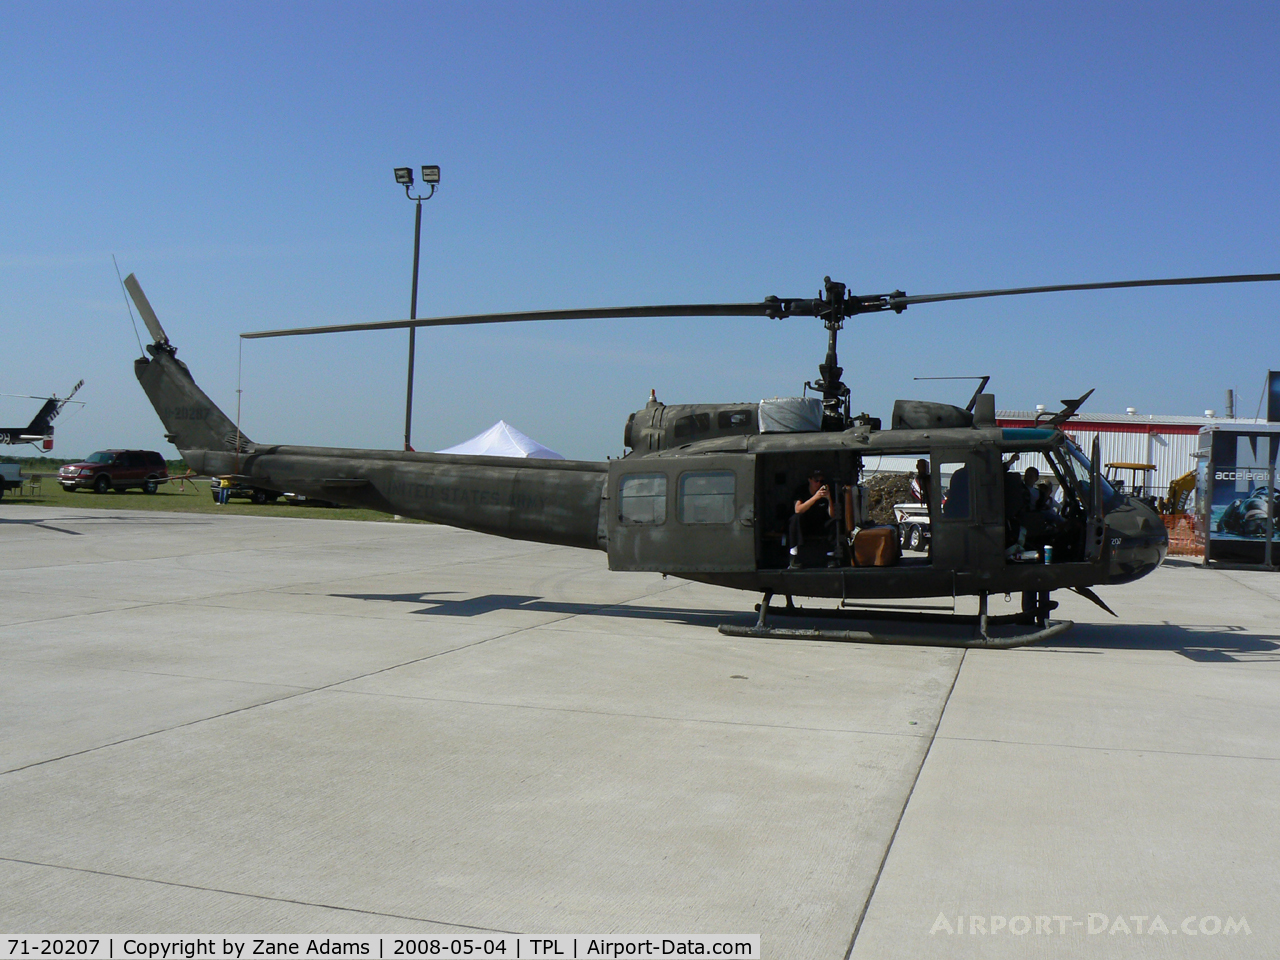 71-20207, 1971 Bell UH-1H Iroquois C/N 13031, At Central Texas Airshow - AMCOM/Dynacorp rebuild